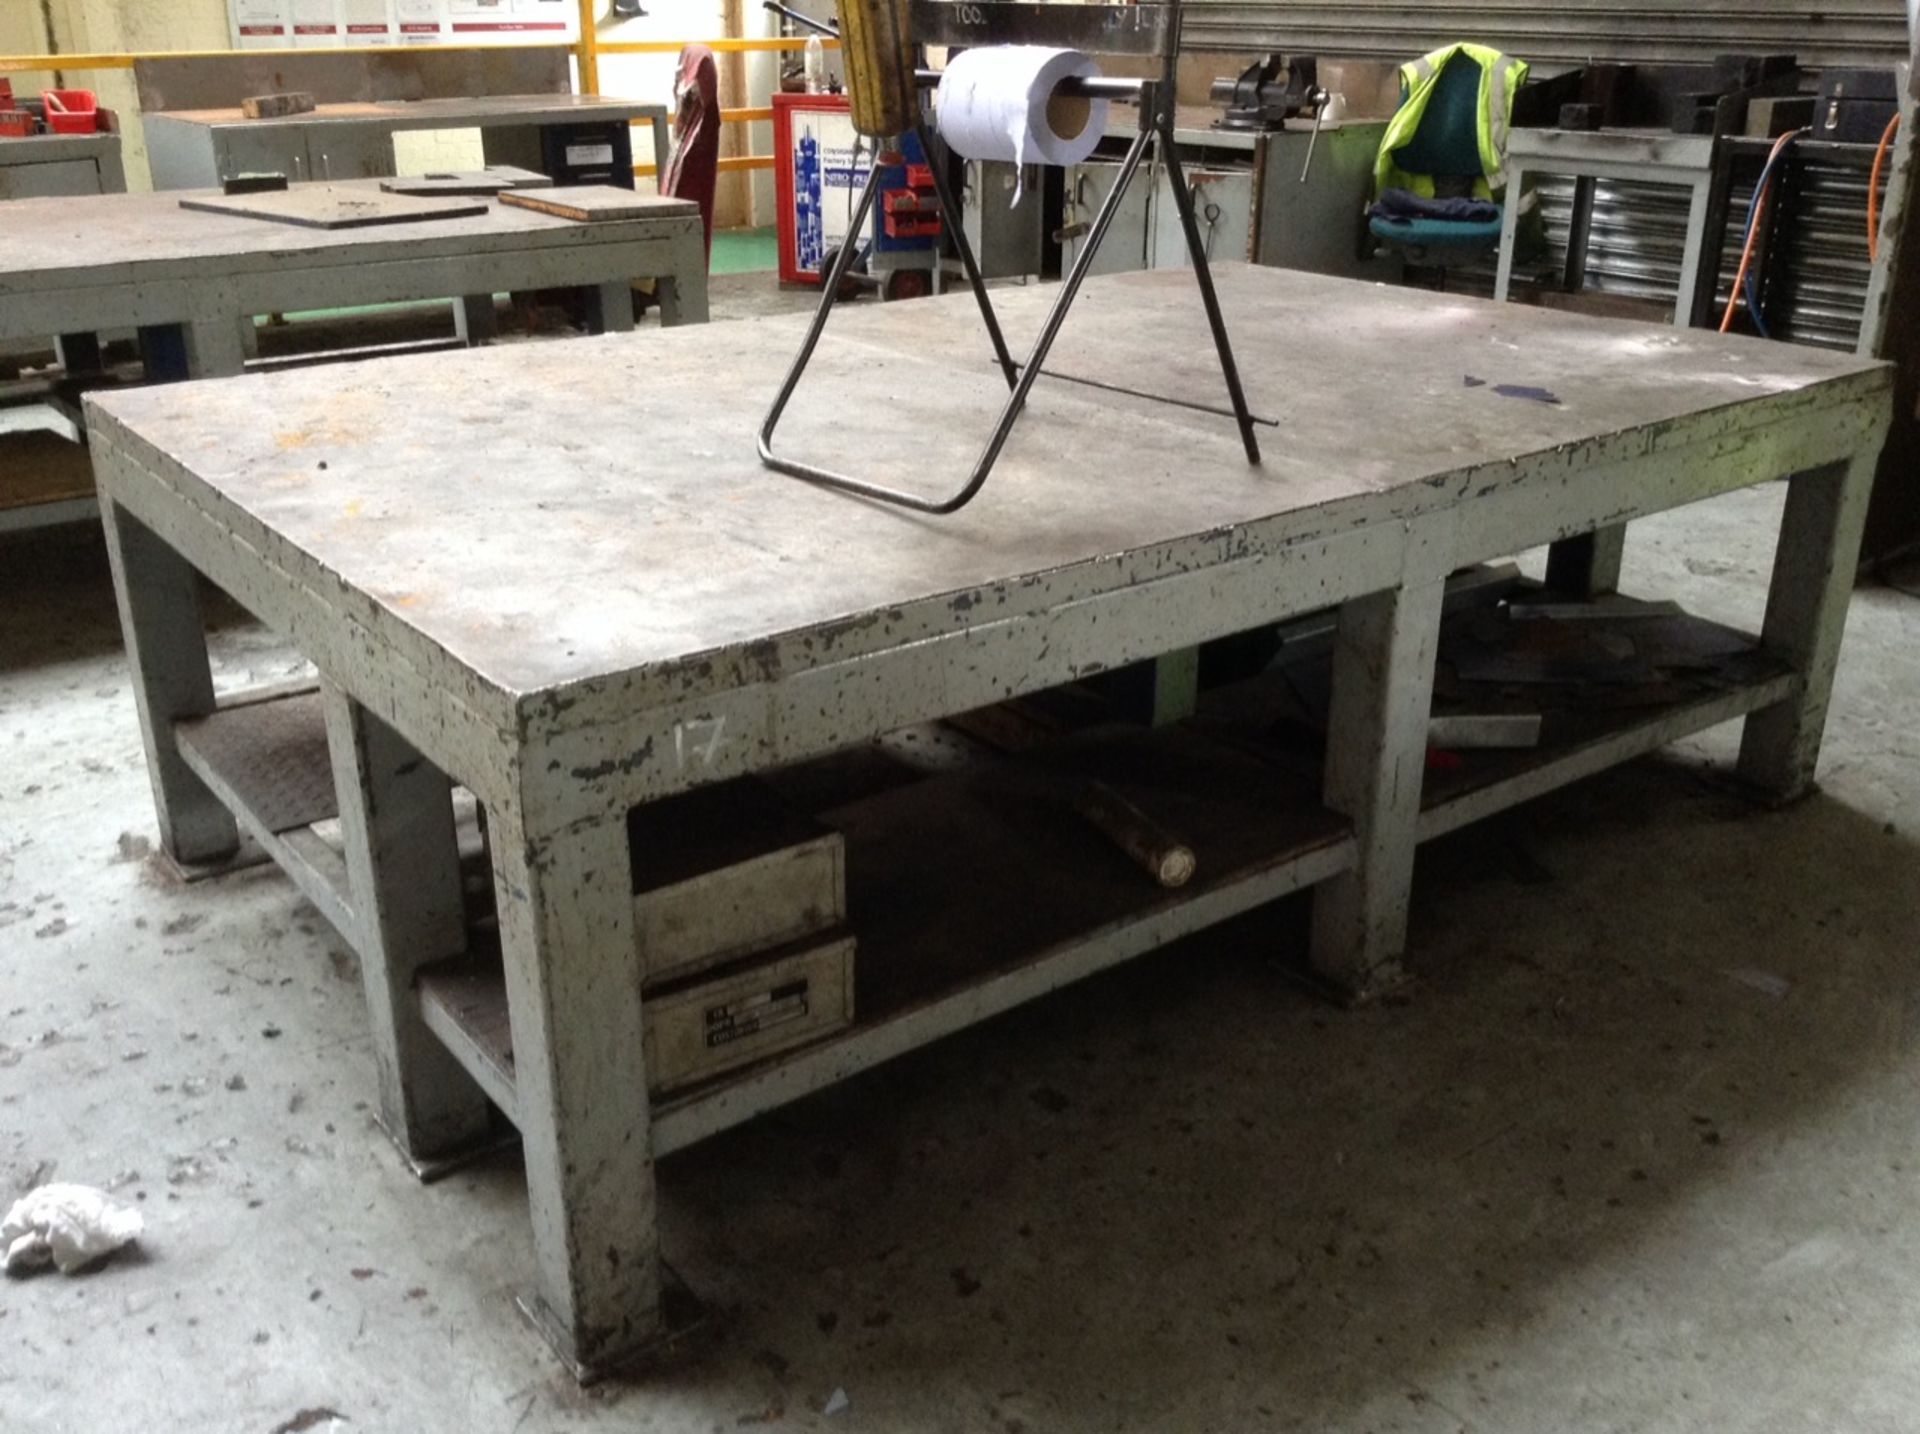 3, Cast iron surface tables, approx. 2.5m x 1.5m each